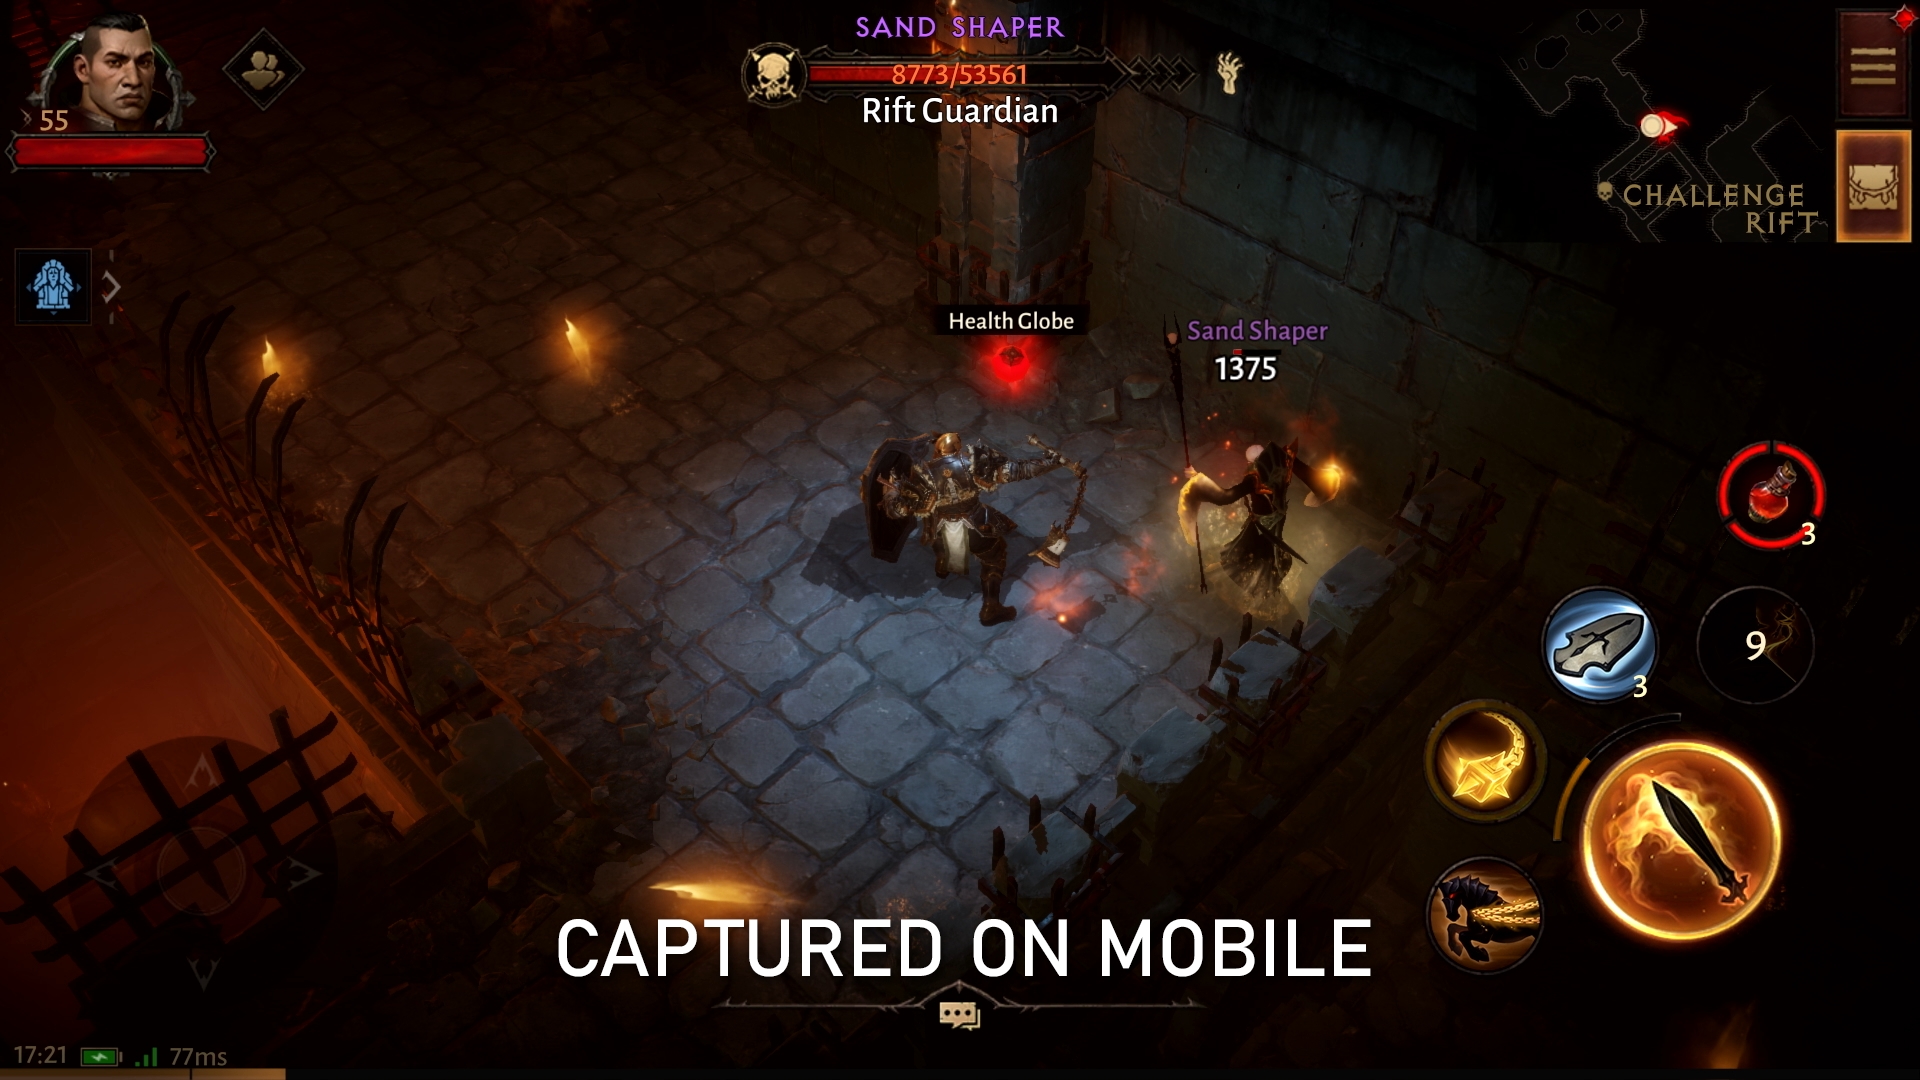 Diablo Immortal Hits Android, iOS and PC on June 2 - CNET